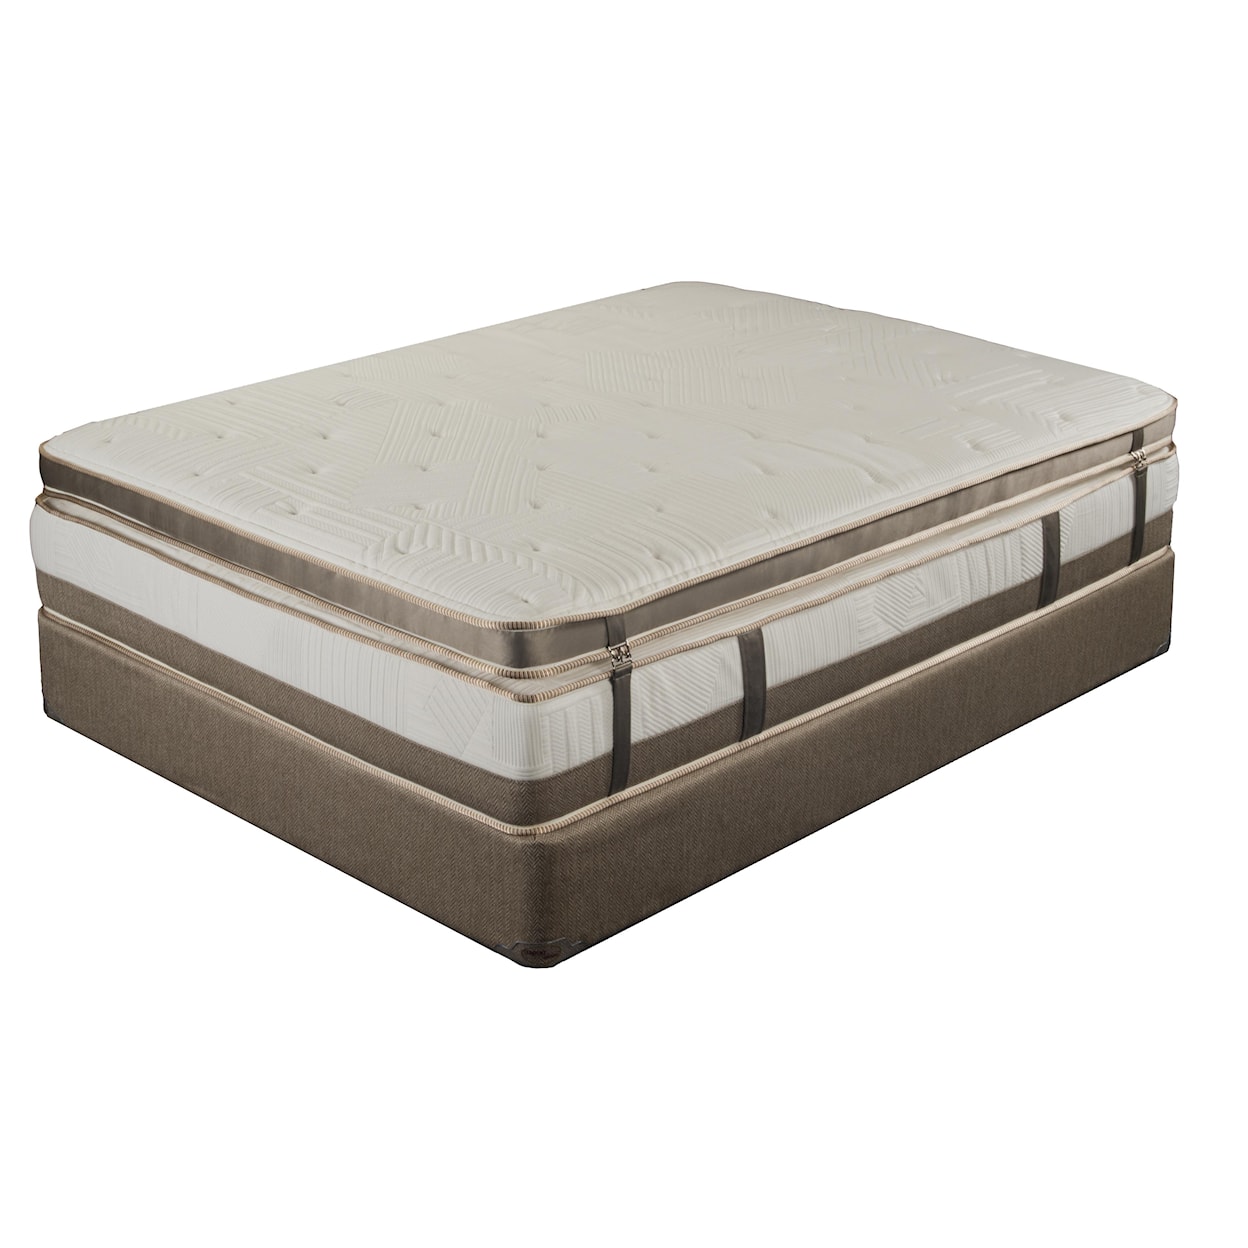 King Koil Extended Life 3300 Full Mattress with Removable Top Layer